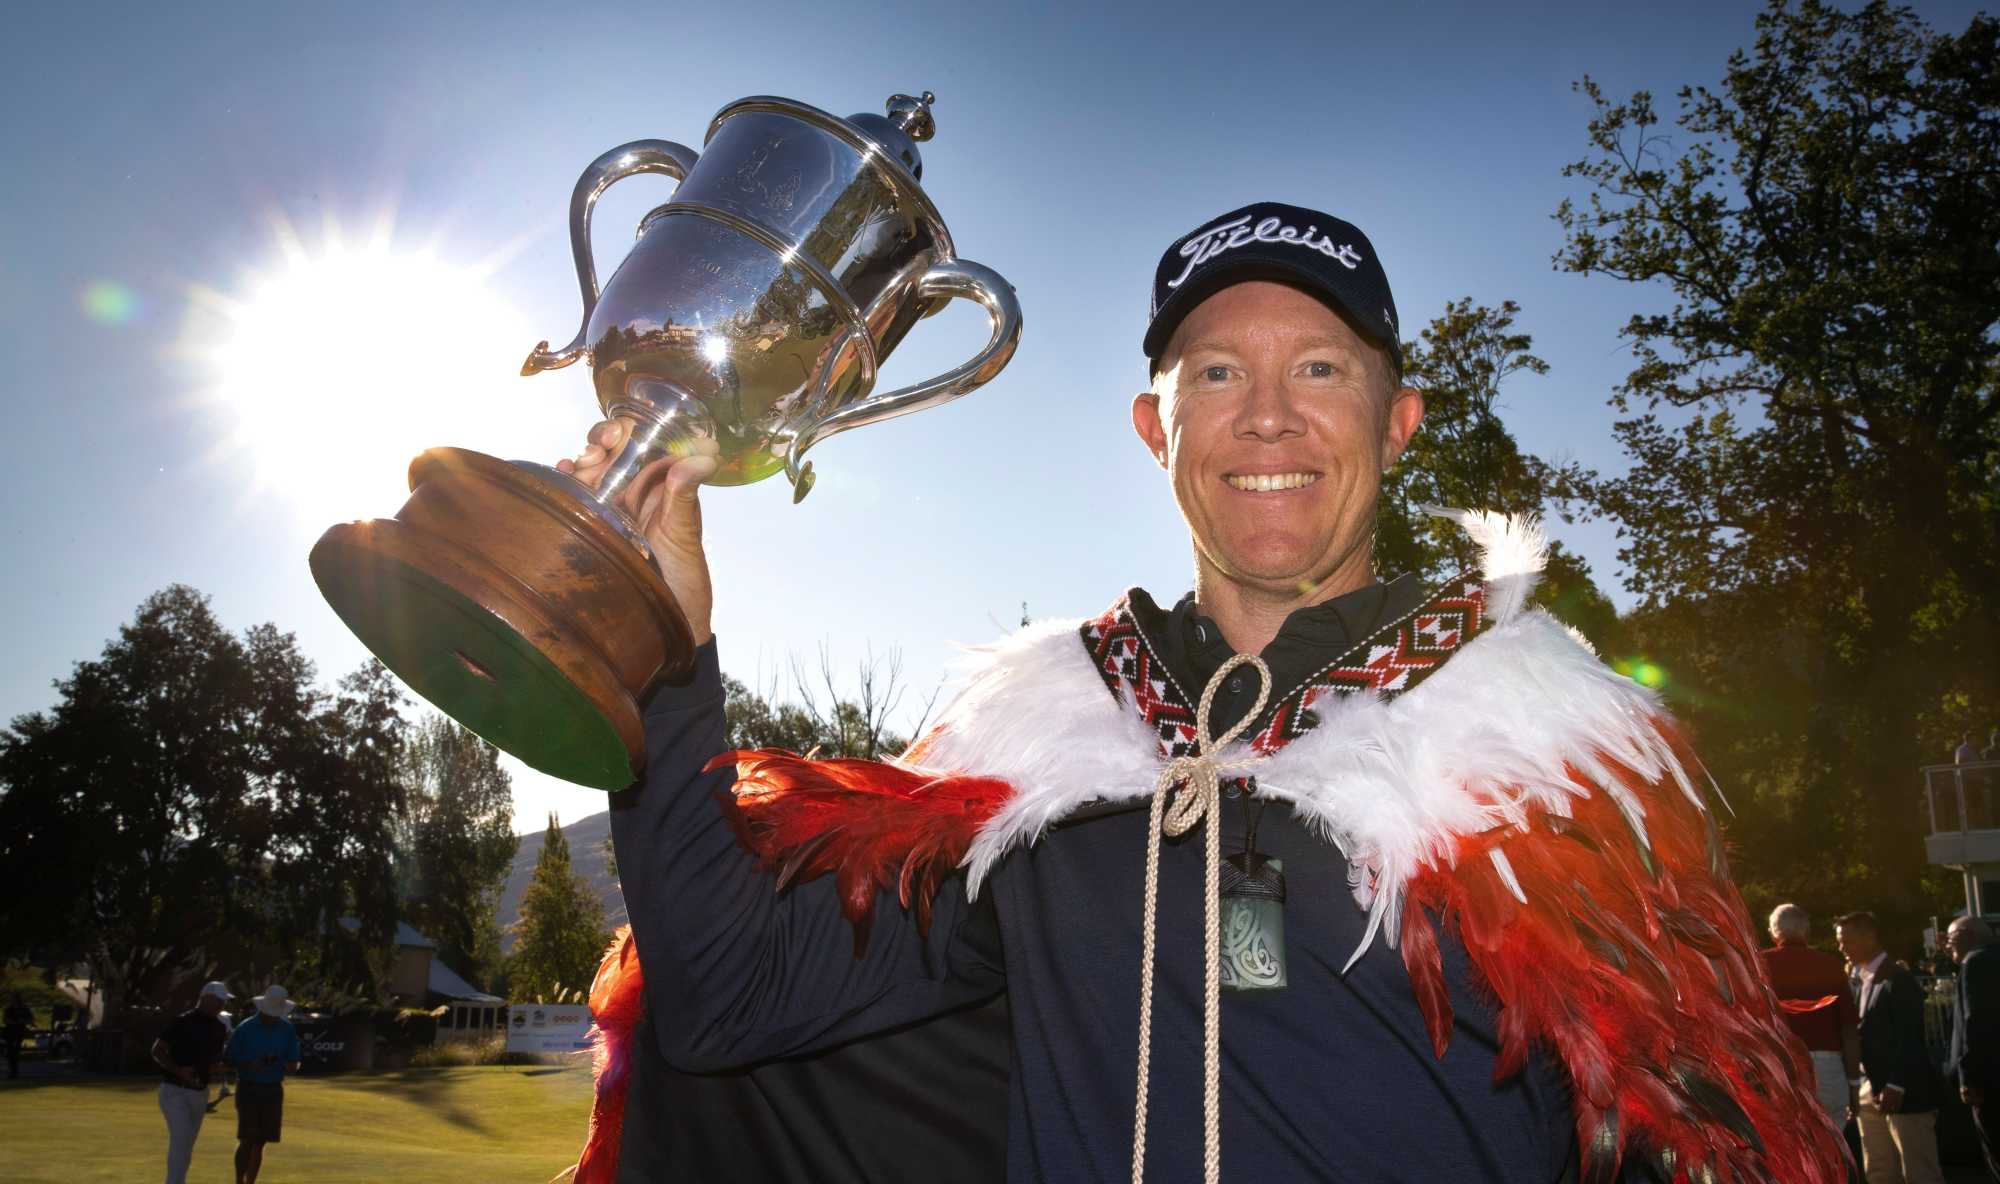 Brad Kennedy is all smiles after winning the 2020 New Zealand Open at Millbrook Resort. Photo: Photosport NZ.